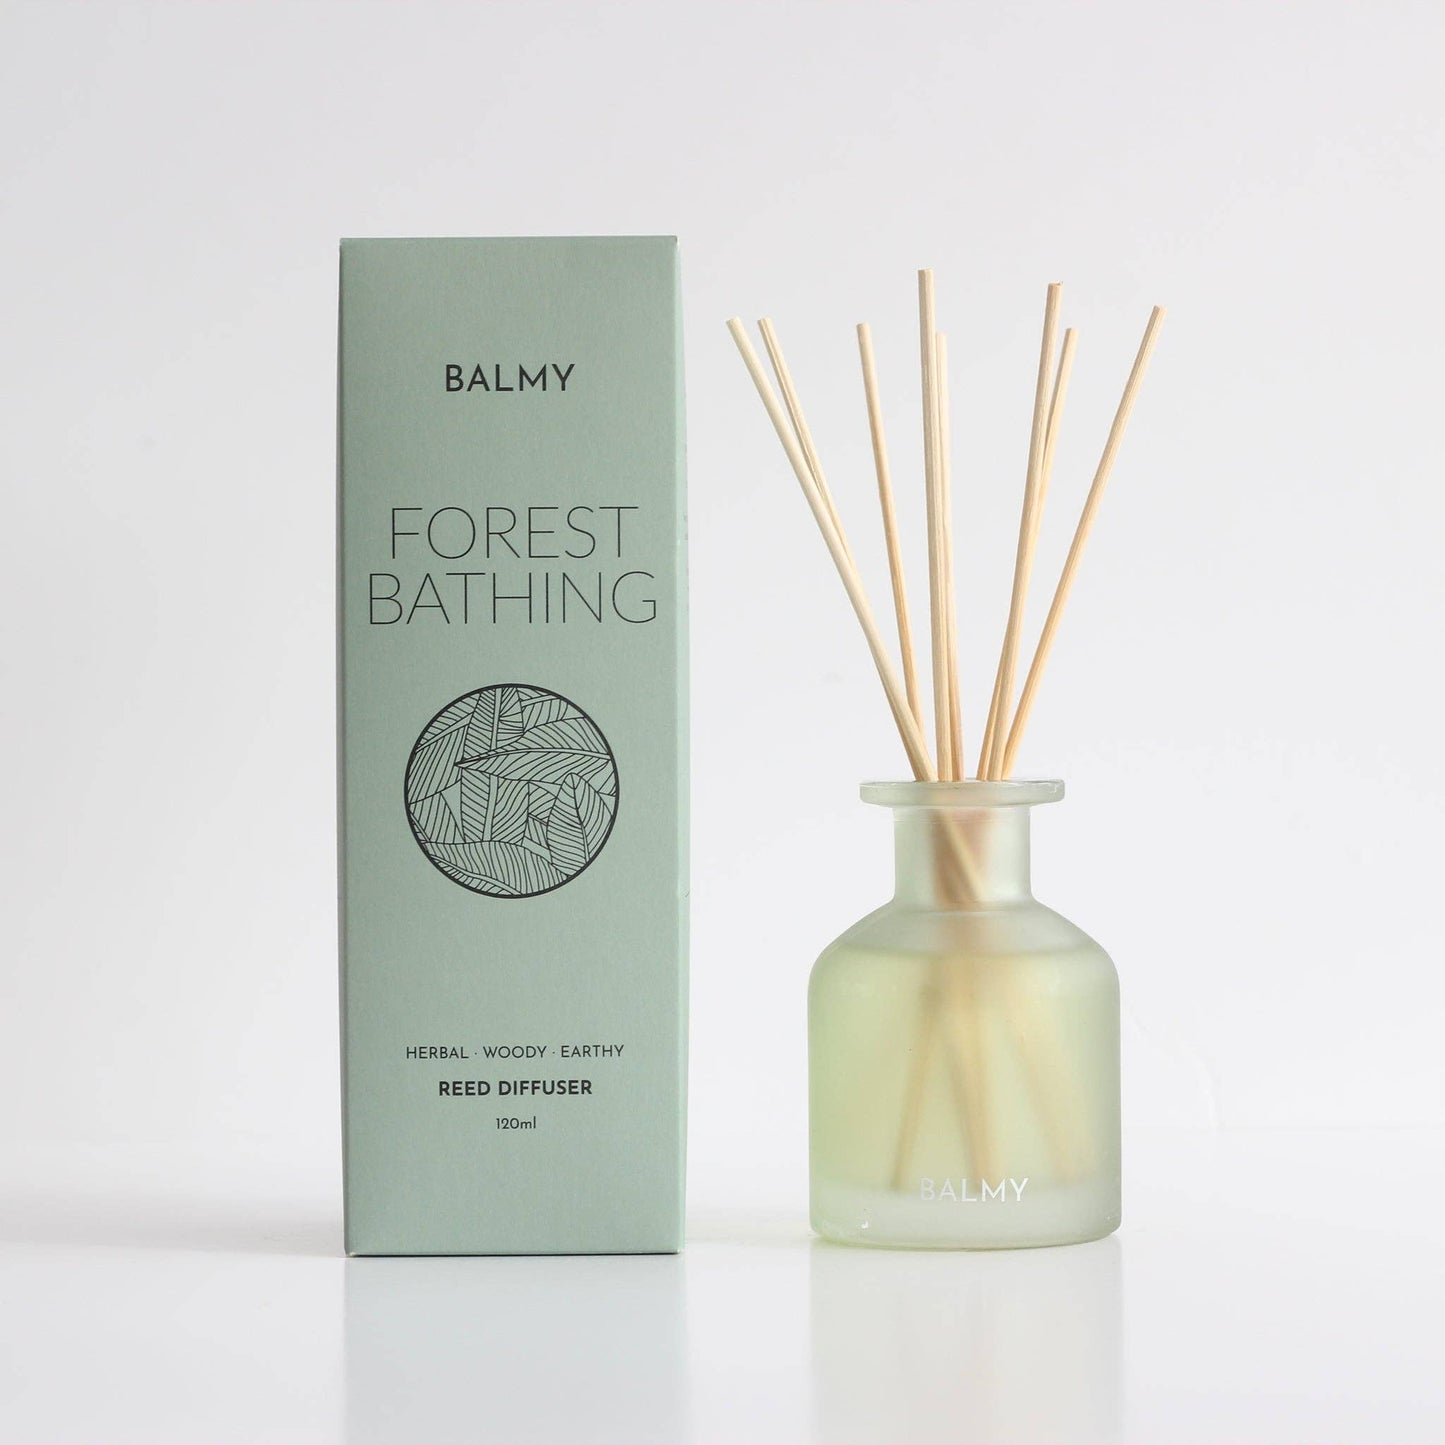 Balmy Forest Bathing Reed Diffuser at Joetie Home Fragrance. Luxury Handmade Apothecary Soy Candles